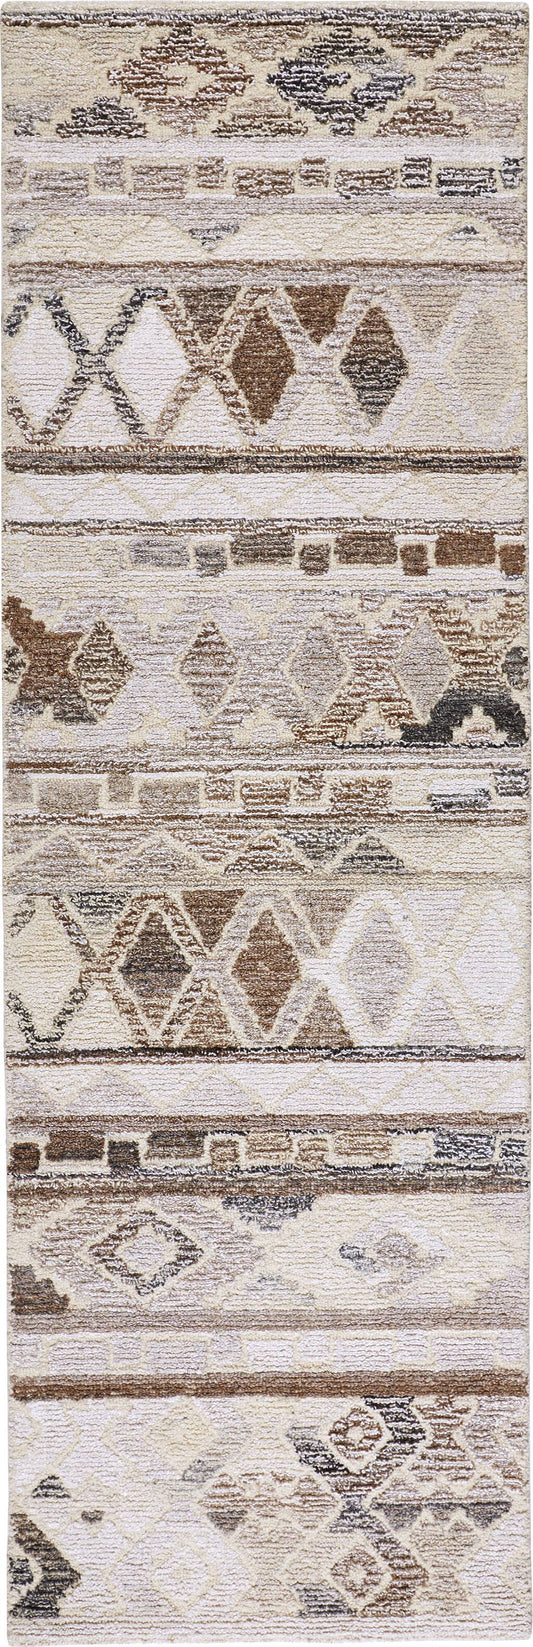 8' Ivory Tan And Gray Wool Abstract Tufted Handmade Runner Rug